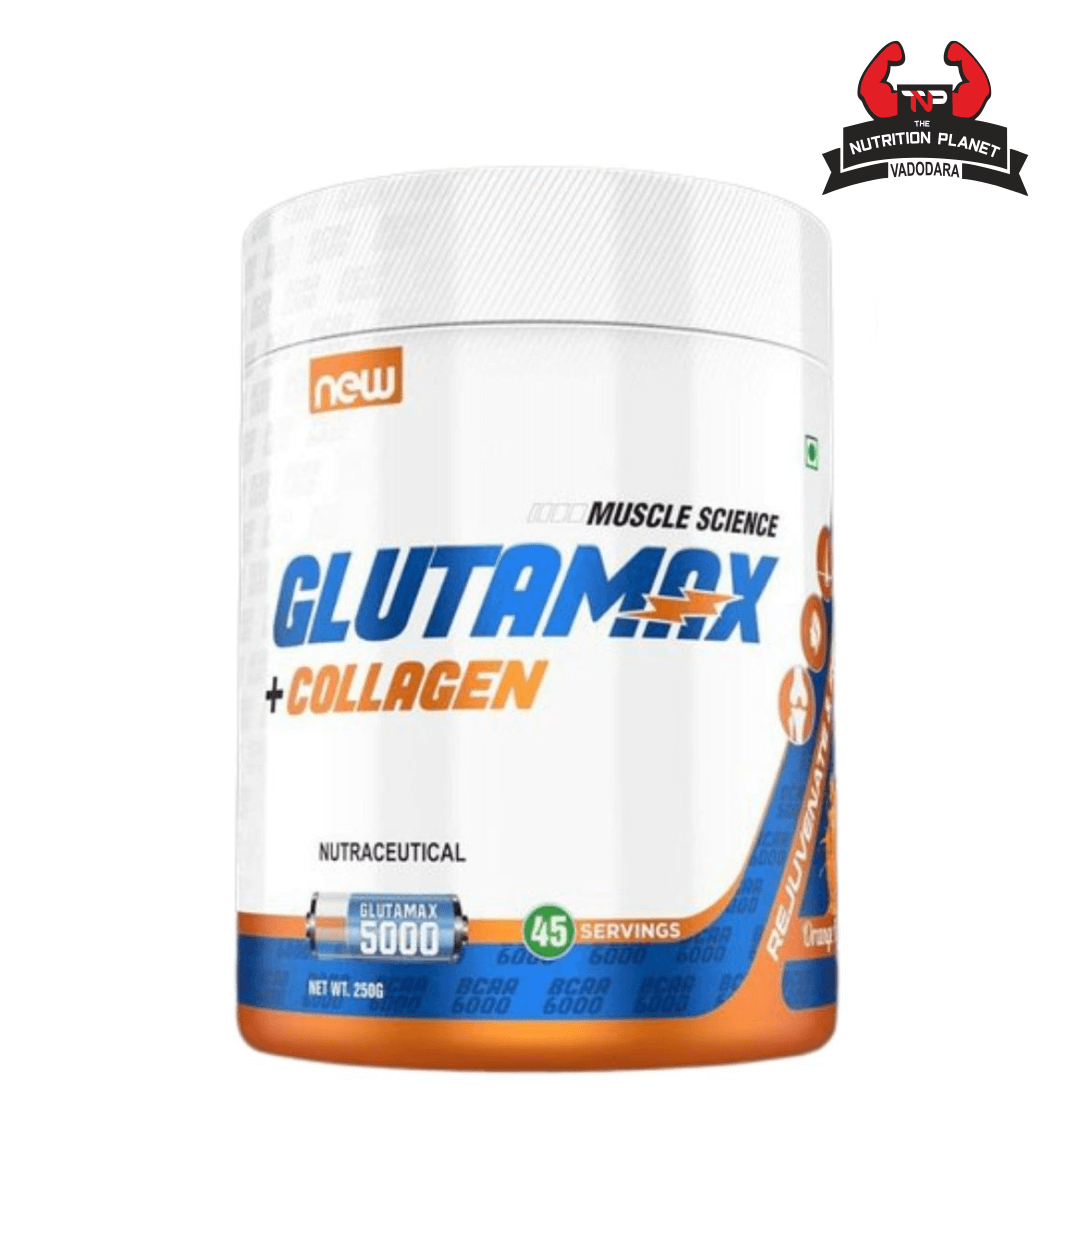 Muscle Science Glutamax with Collagen 